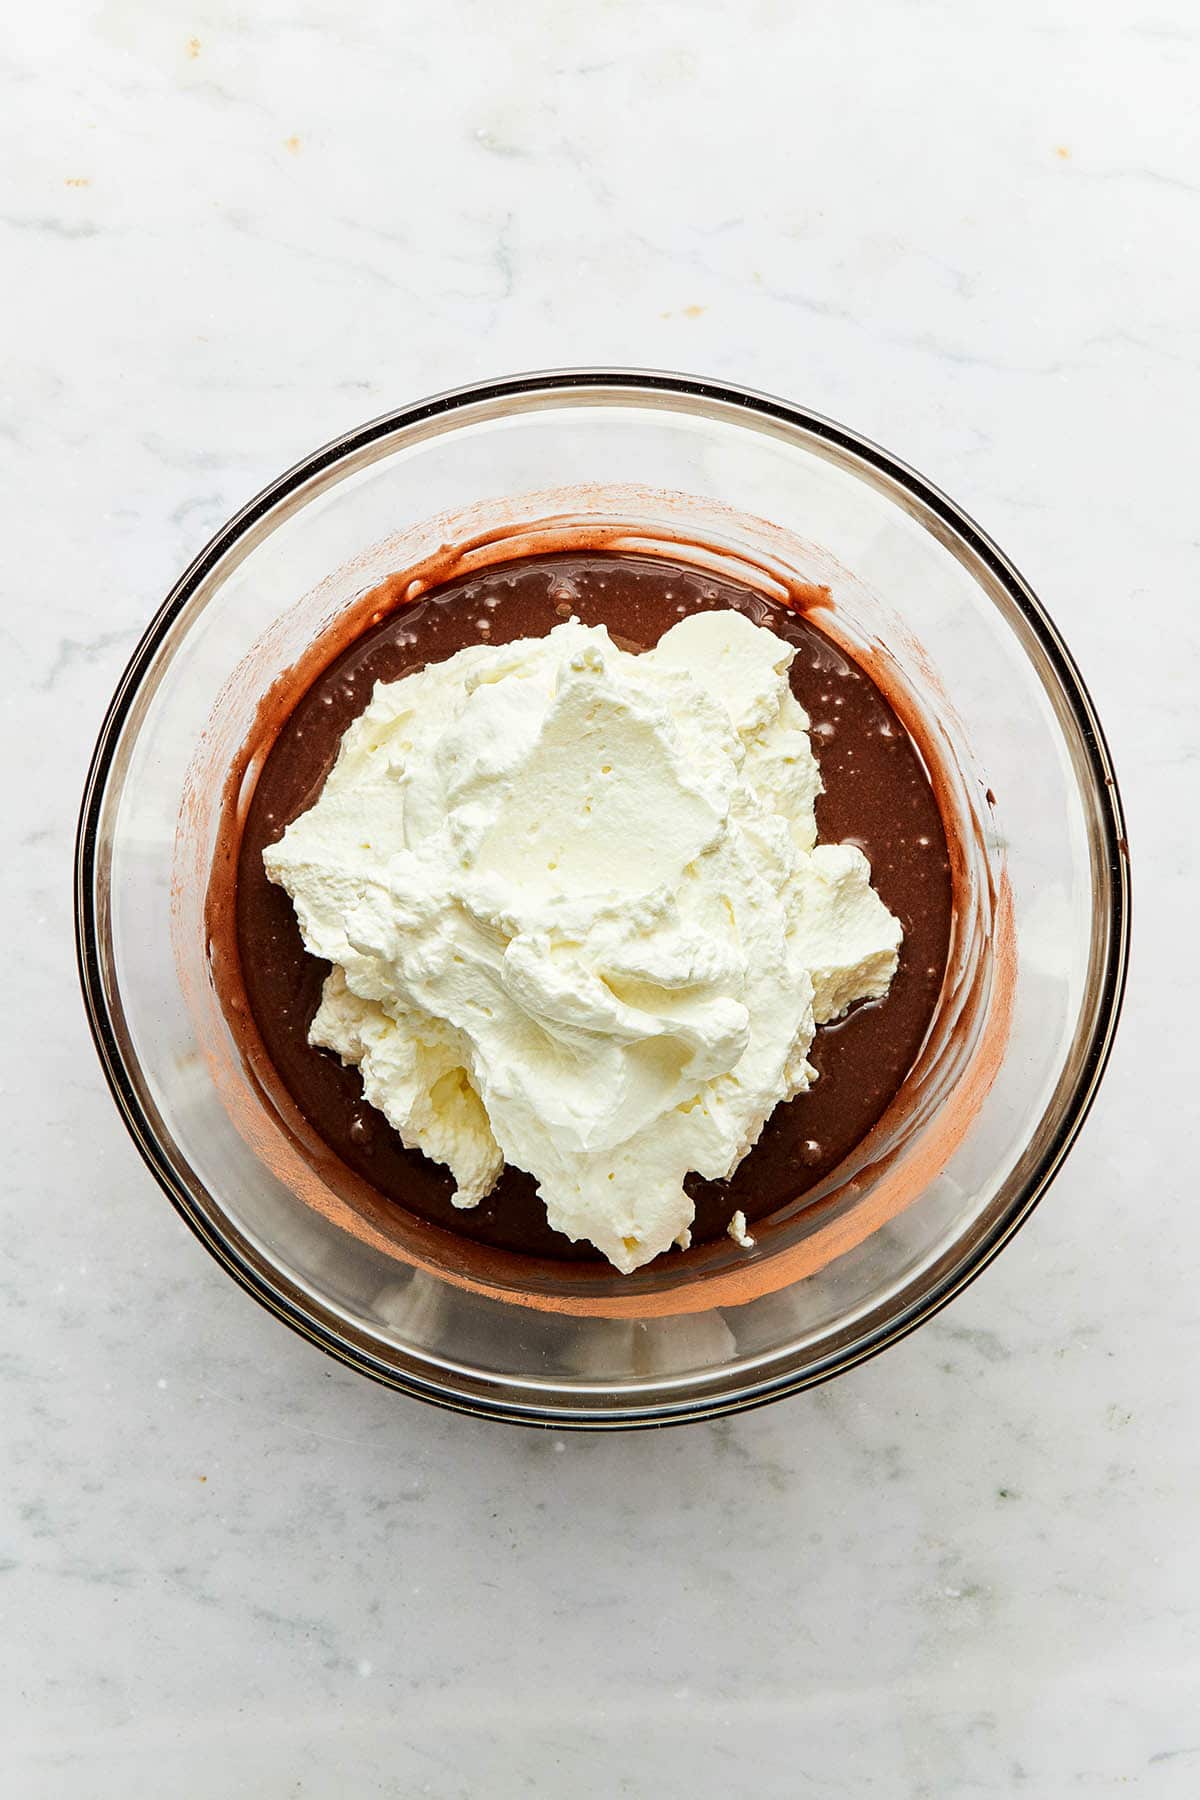 Whipped cream dolloped on top of chocolate batter in a glass bowl.